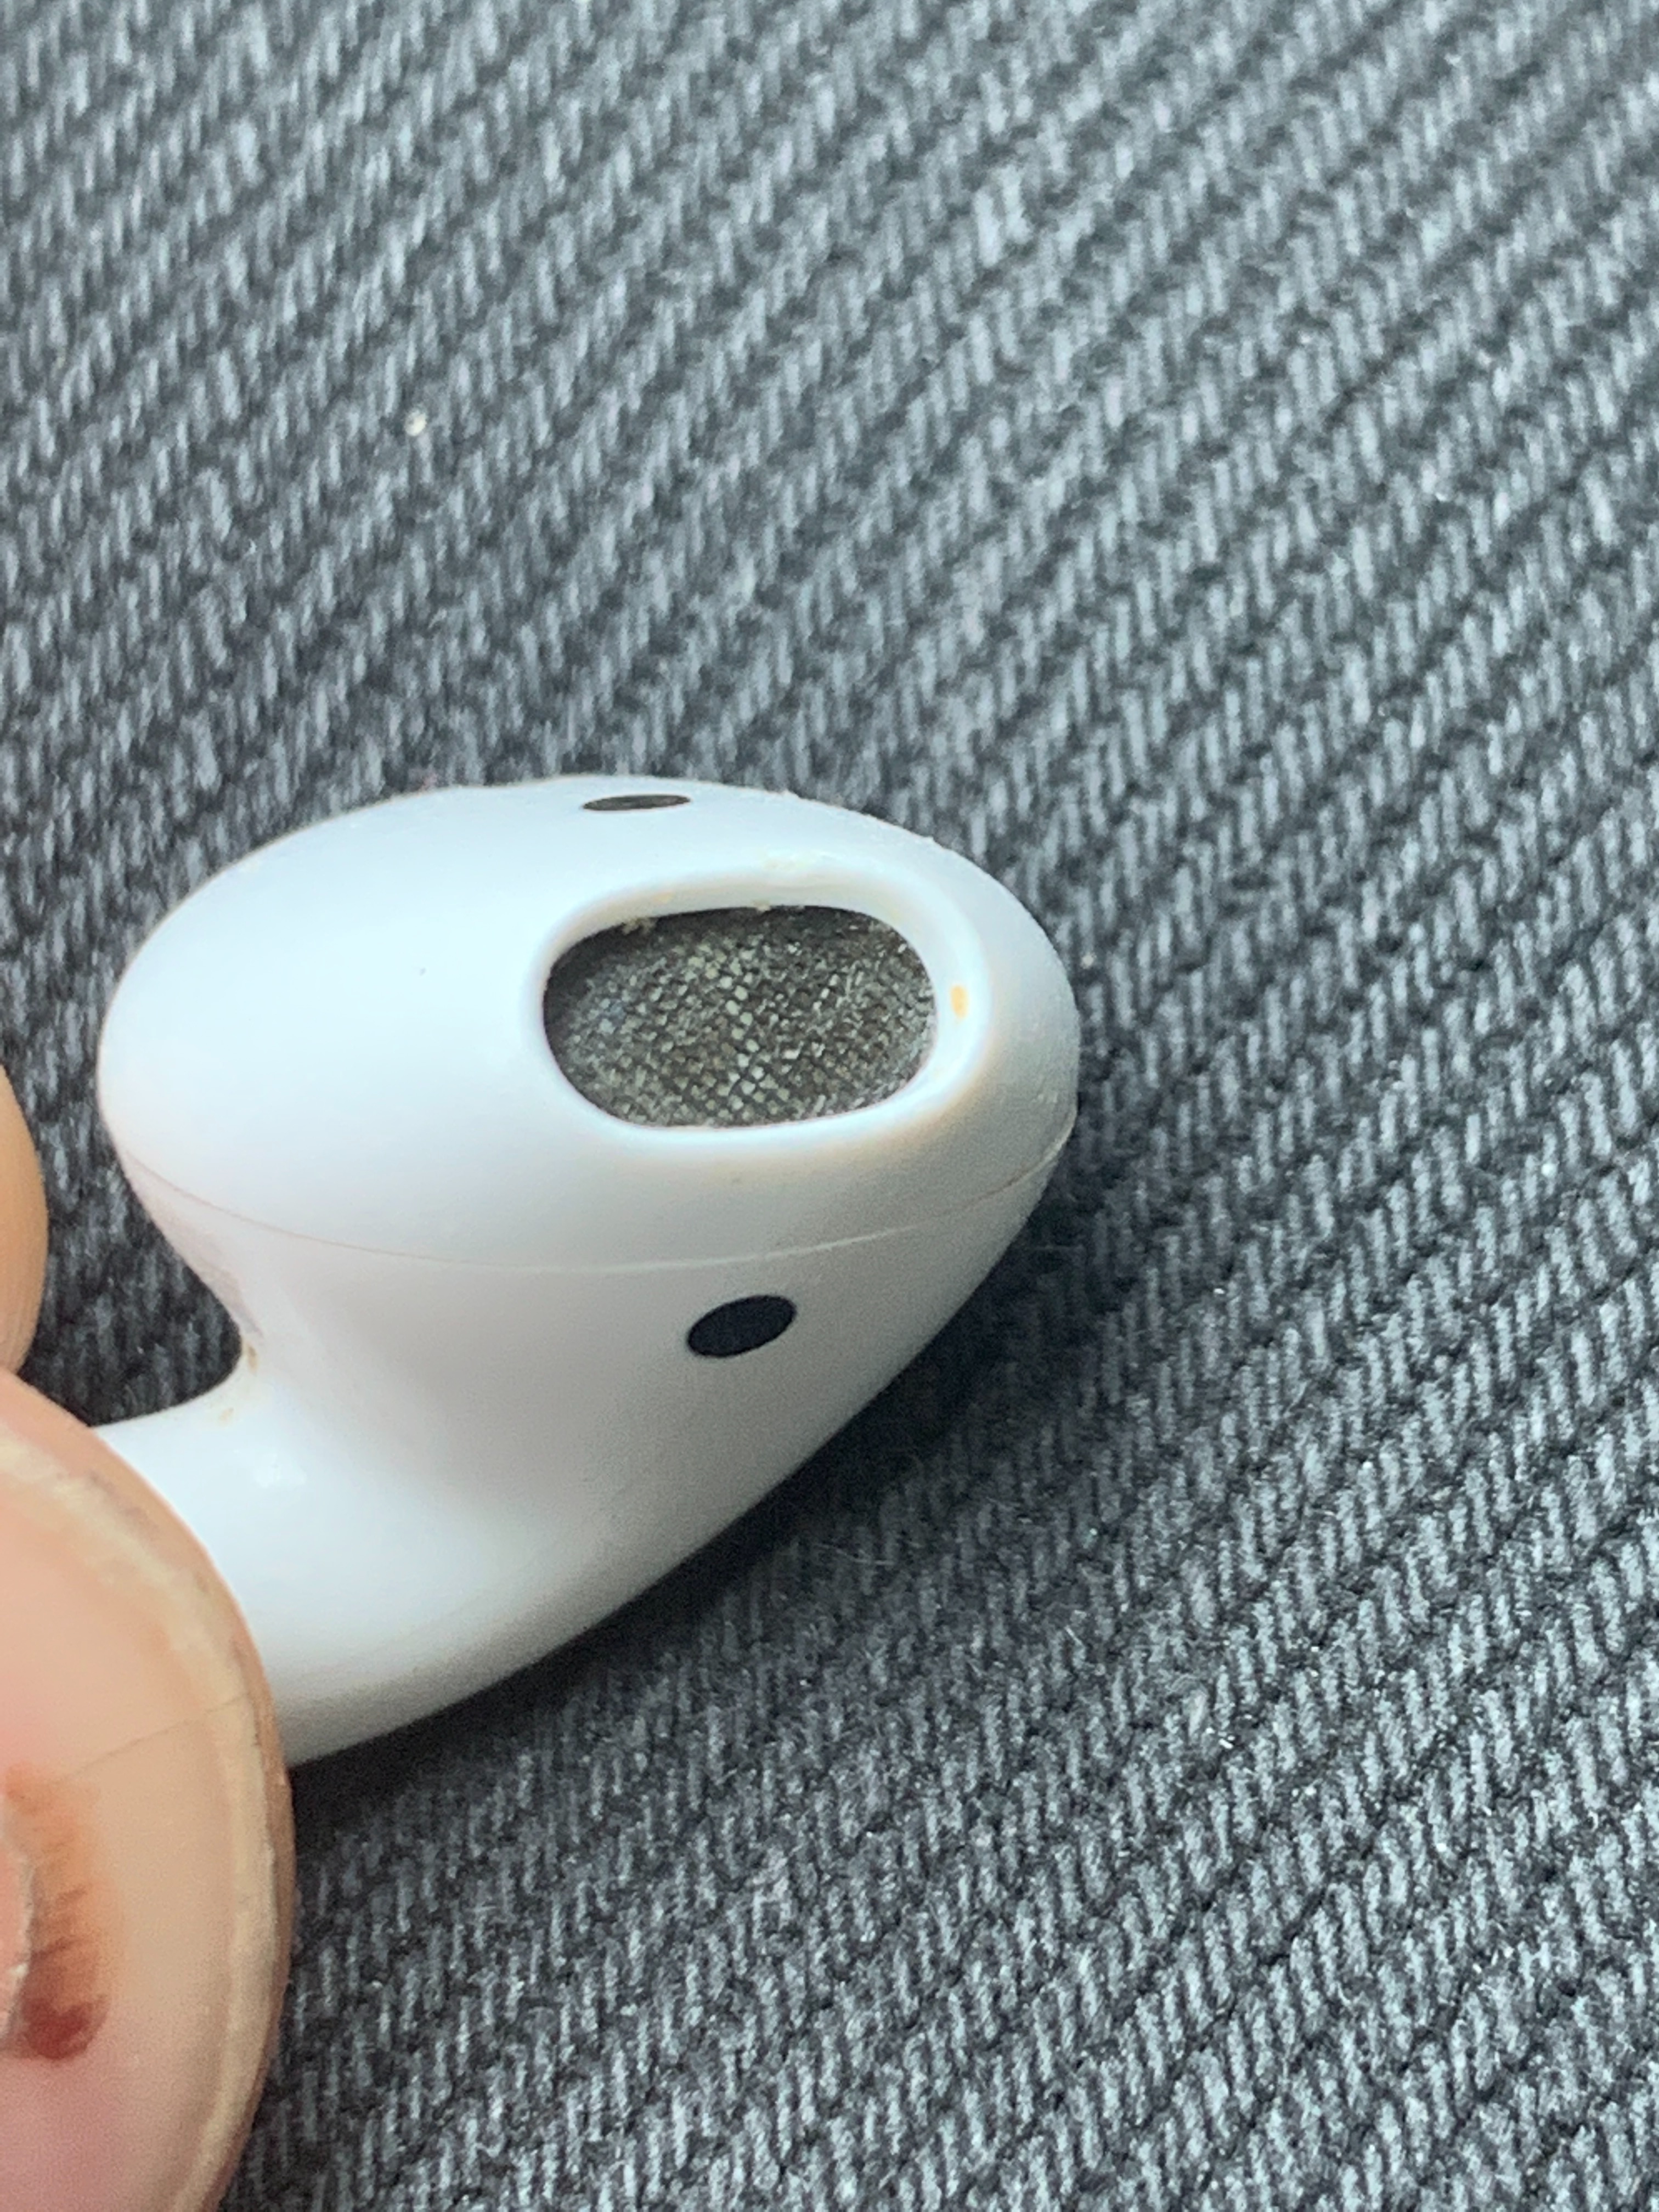 eksplicit pilot Dovenskab How do I ACTUALLY clean my AirPods? - Apple Community